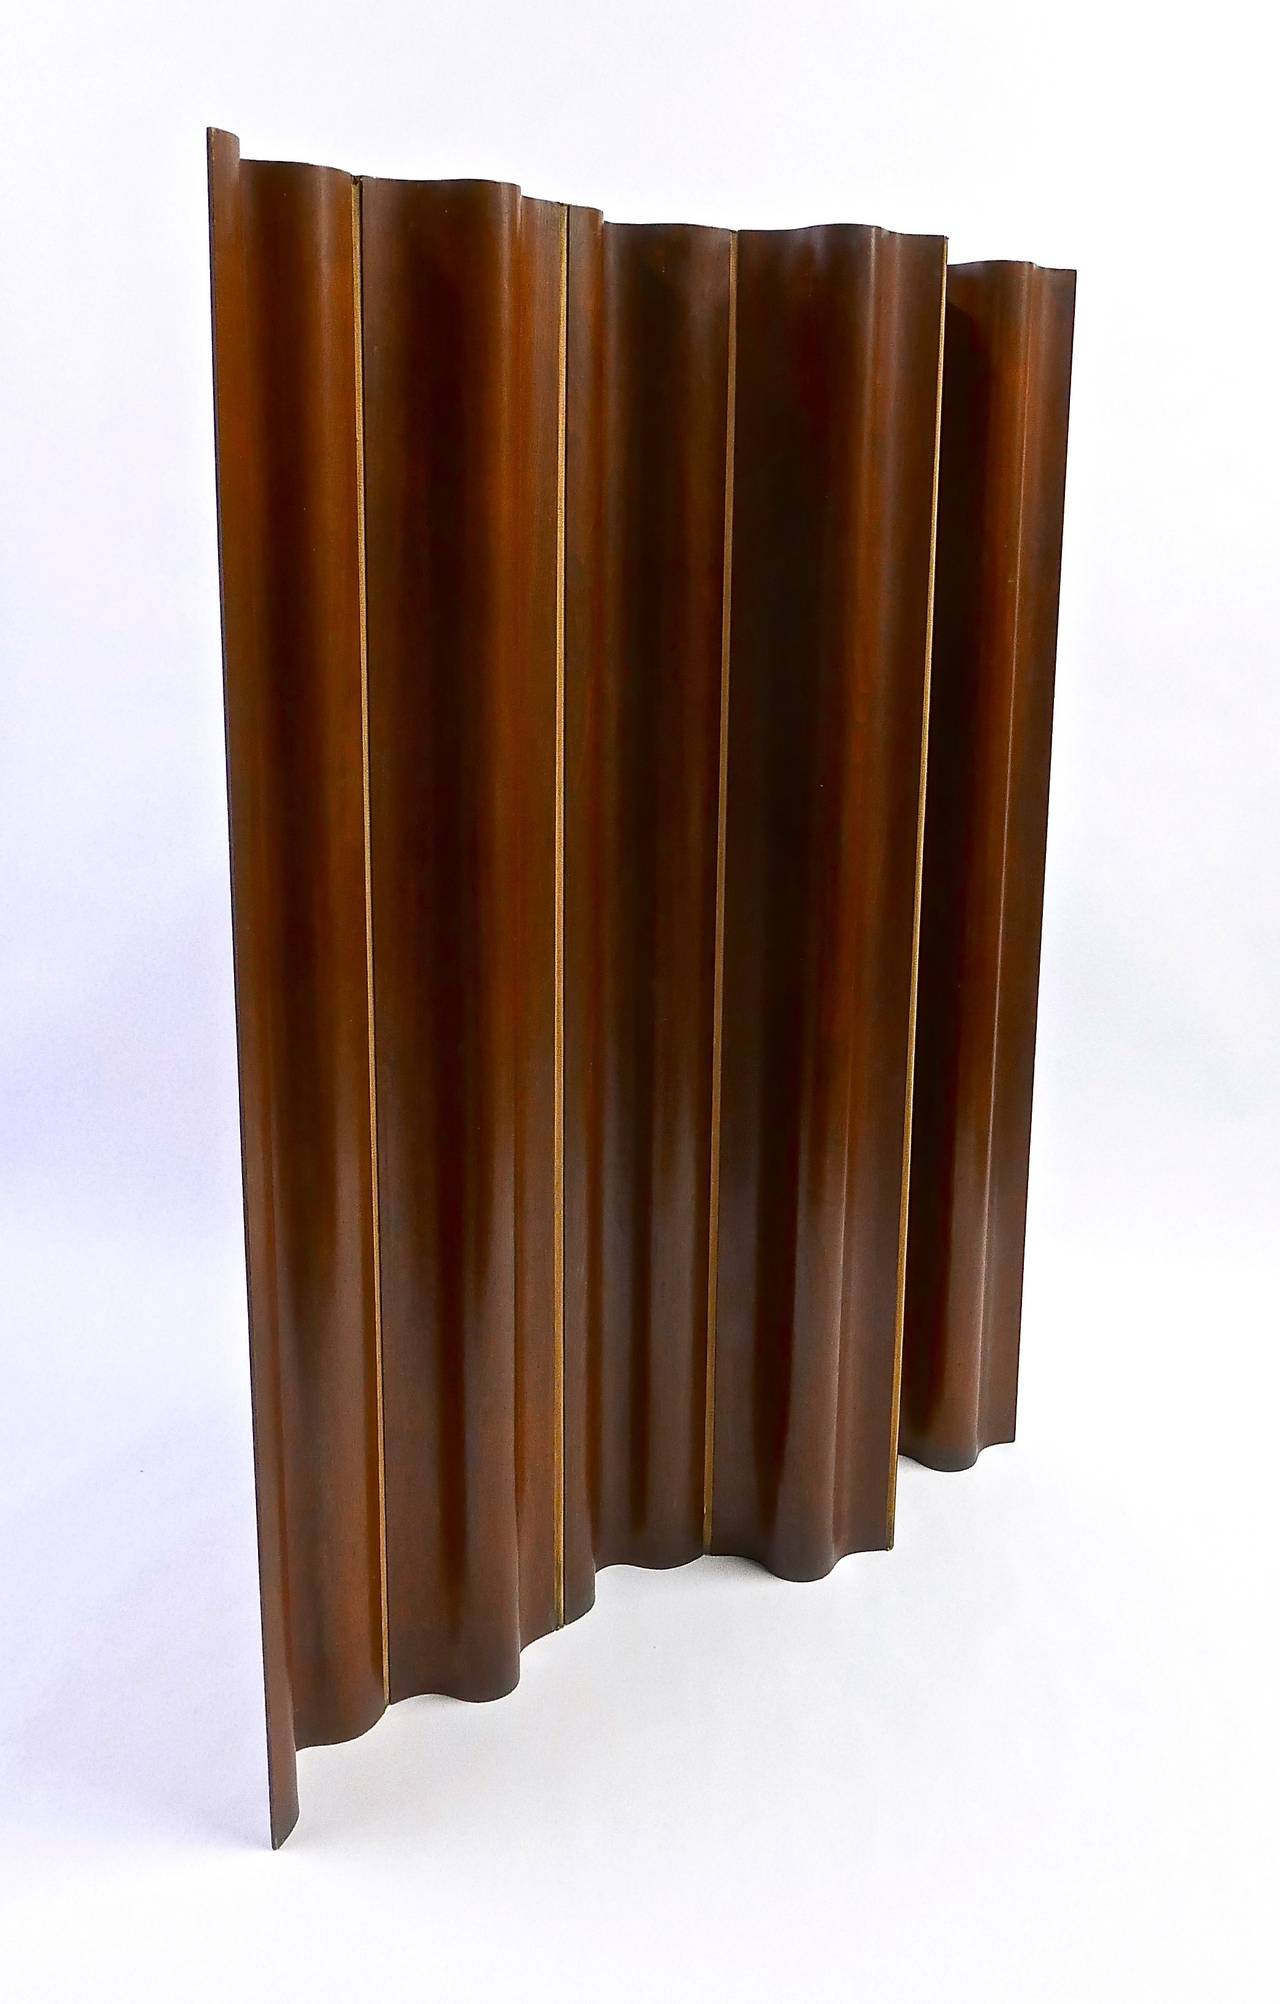 A six-panel molded plywood folding screen in walnut veneer by Herman Miller.
Vintage examples in walnut are extremely rare, this example is from 1945.